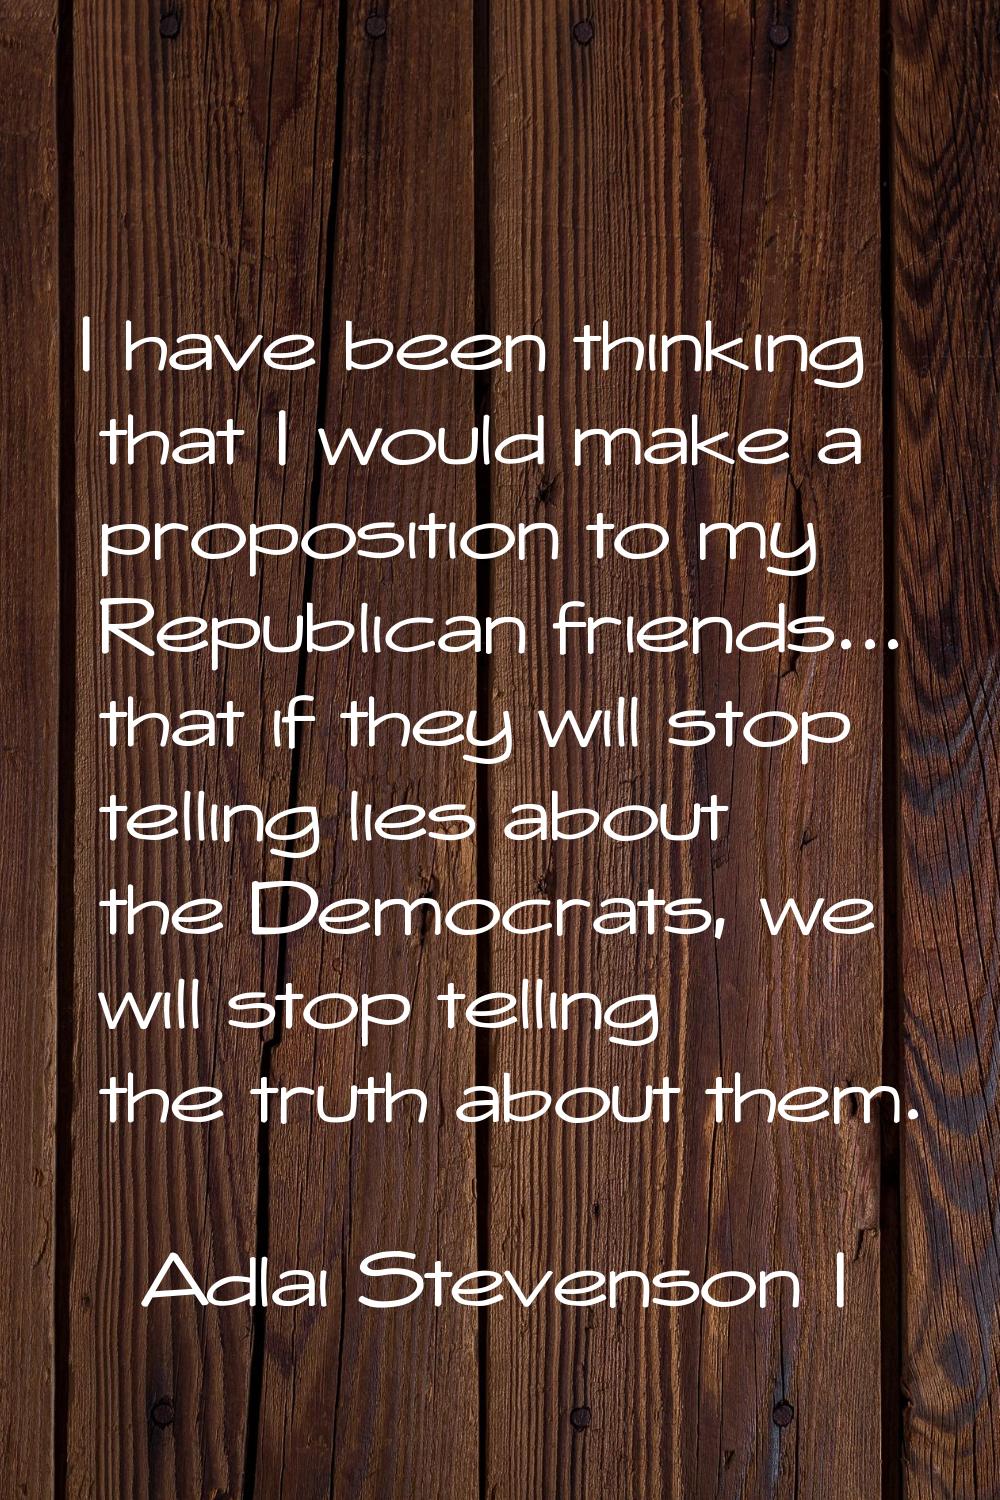 I have been thinking that I would make a proposition to my Republican friends... that if they will 